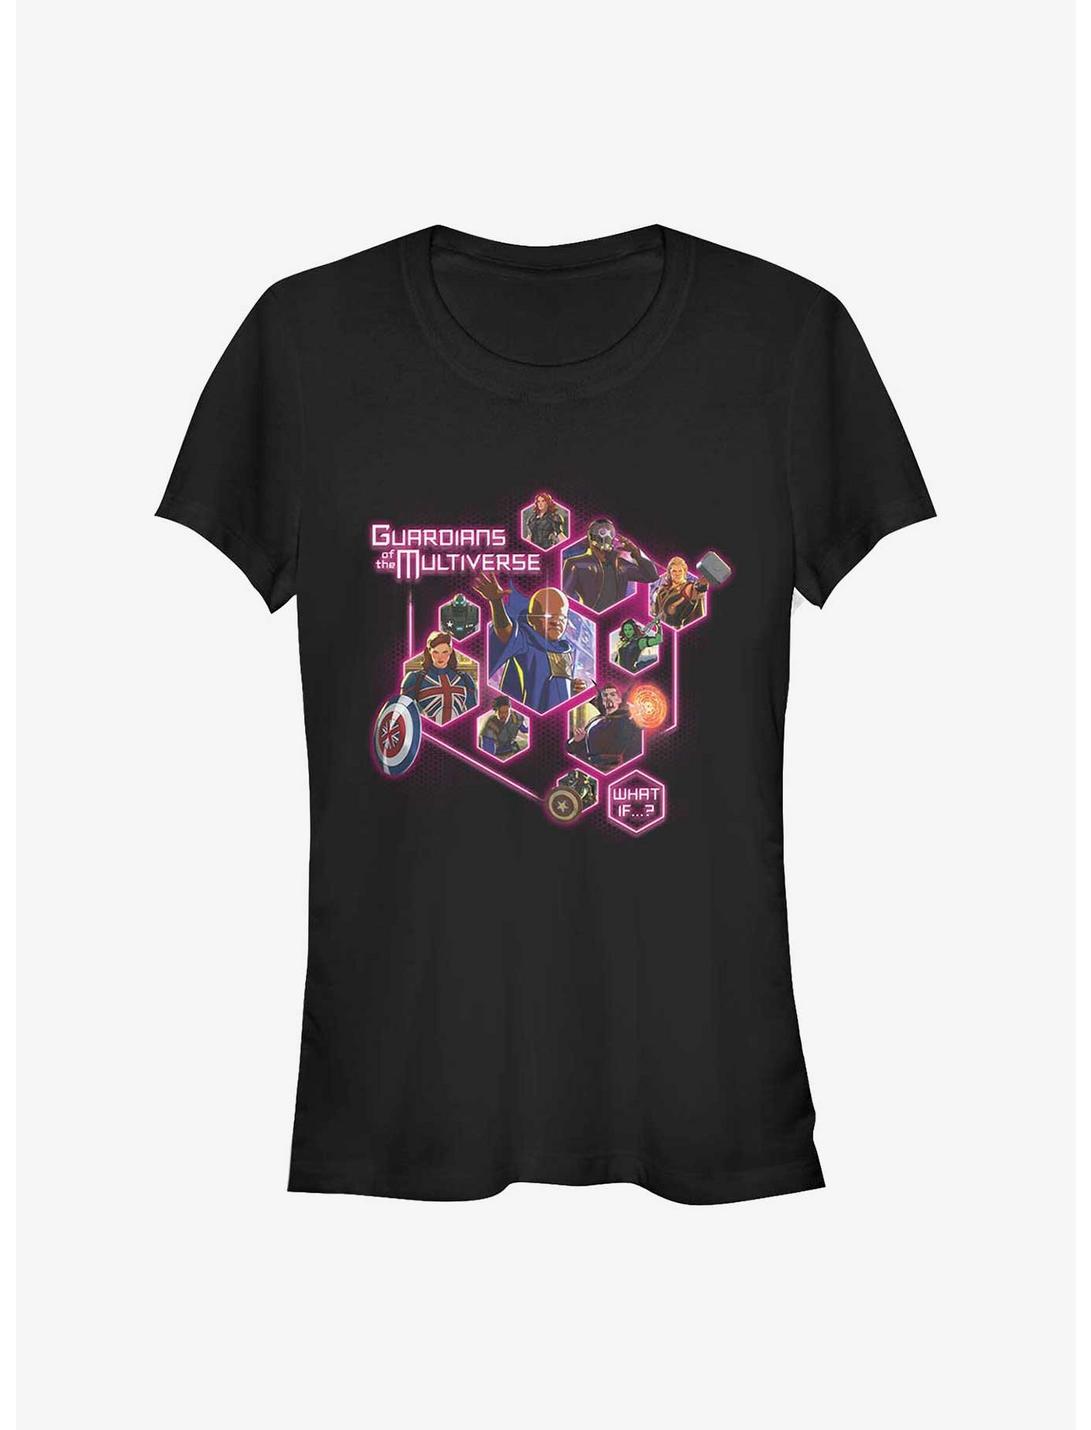 What If...? GuardiansOf The Multiverse Pods Girls T-Shirt, BLACK, hi-res